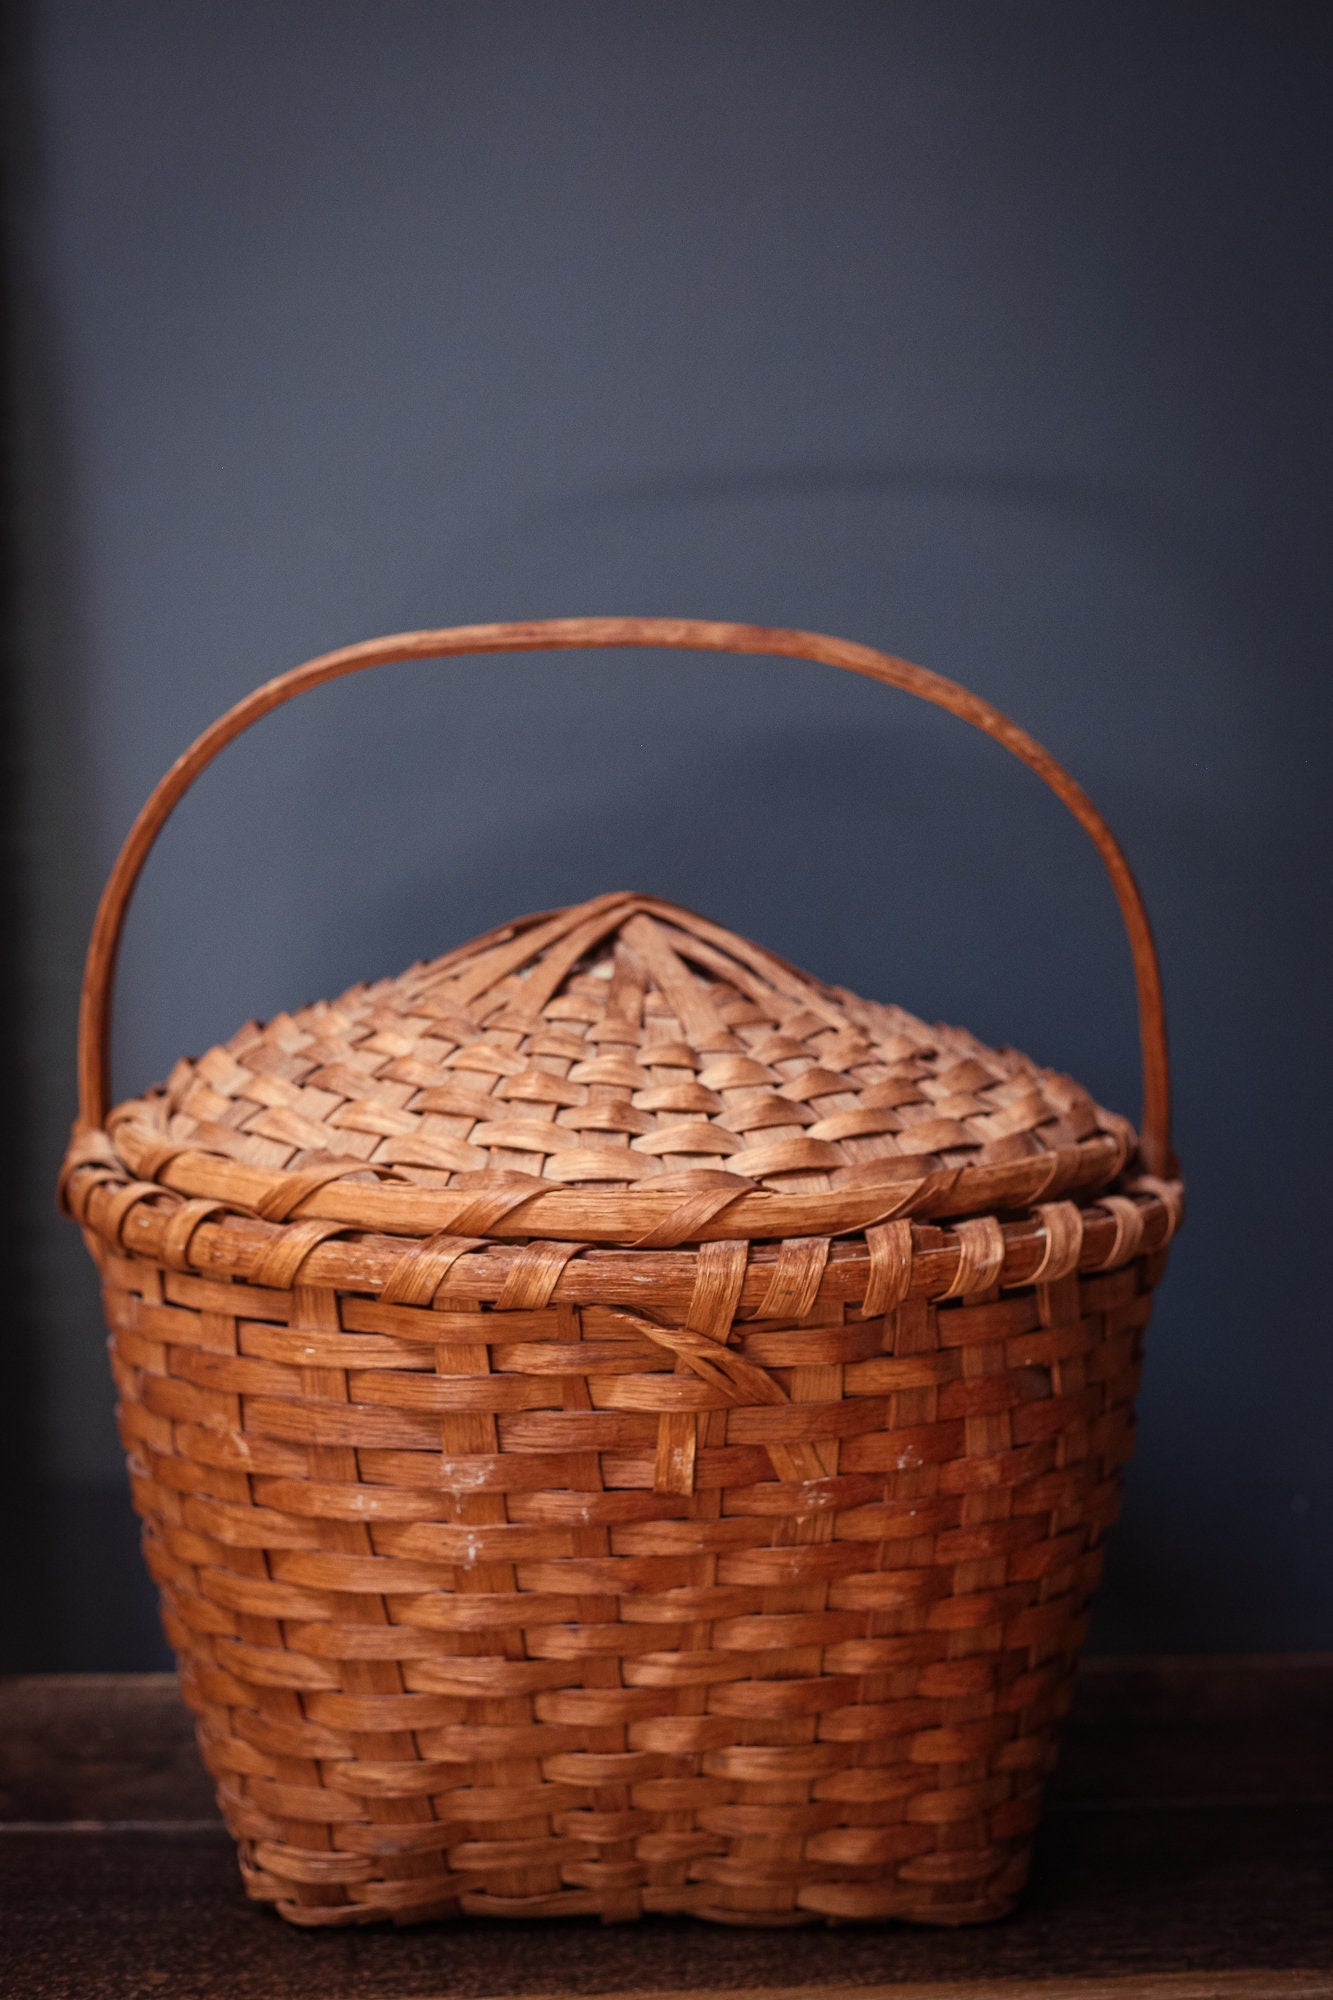 Extra Large Square to Round Shaker Style Lidded Basket with Bent Wood Handle & Lid - Antique Woven Wood Splint Basket with Lid